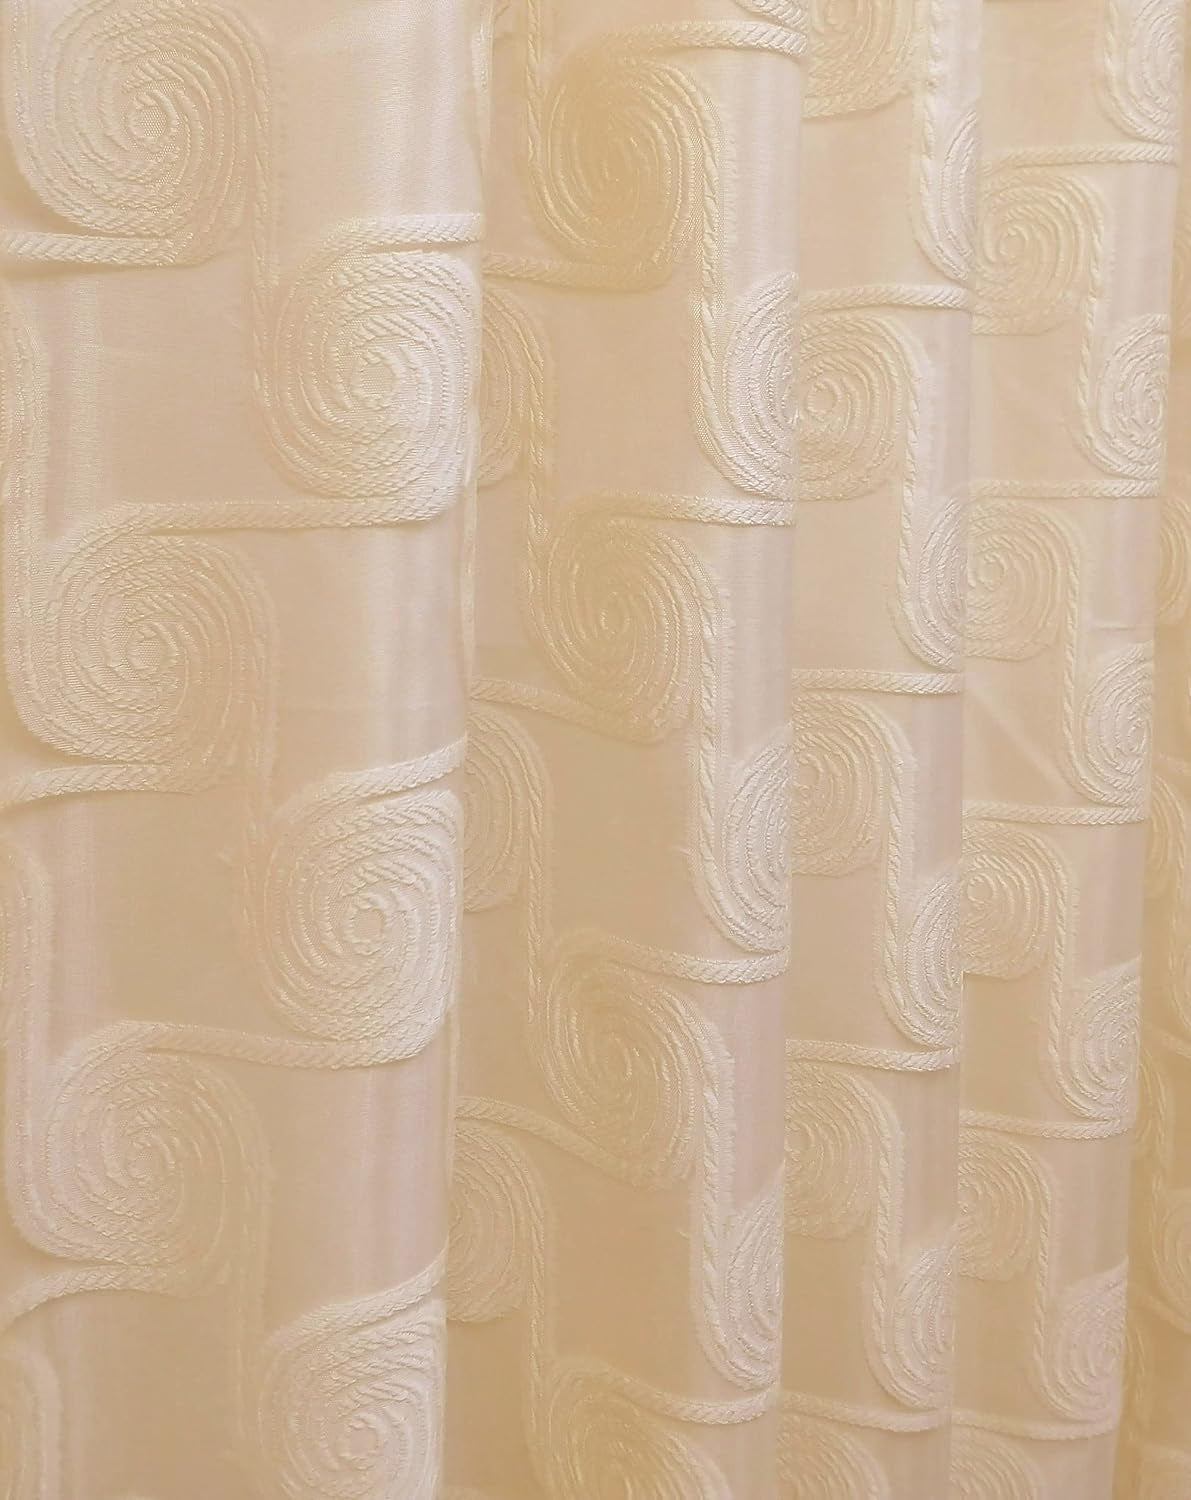 GOHD CIRCLE CYCLE. Clipped Voile. Voile Jacquard Window Curtain Drape with Attached Fancy Valance and Taffeta Backing. 2Pcs Set. Each Pc 54 Inch Wide X 84 Inch Drop + 18 Inch Valance. (COFFEE)